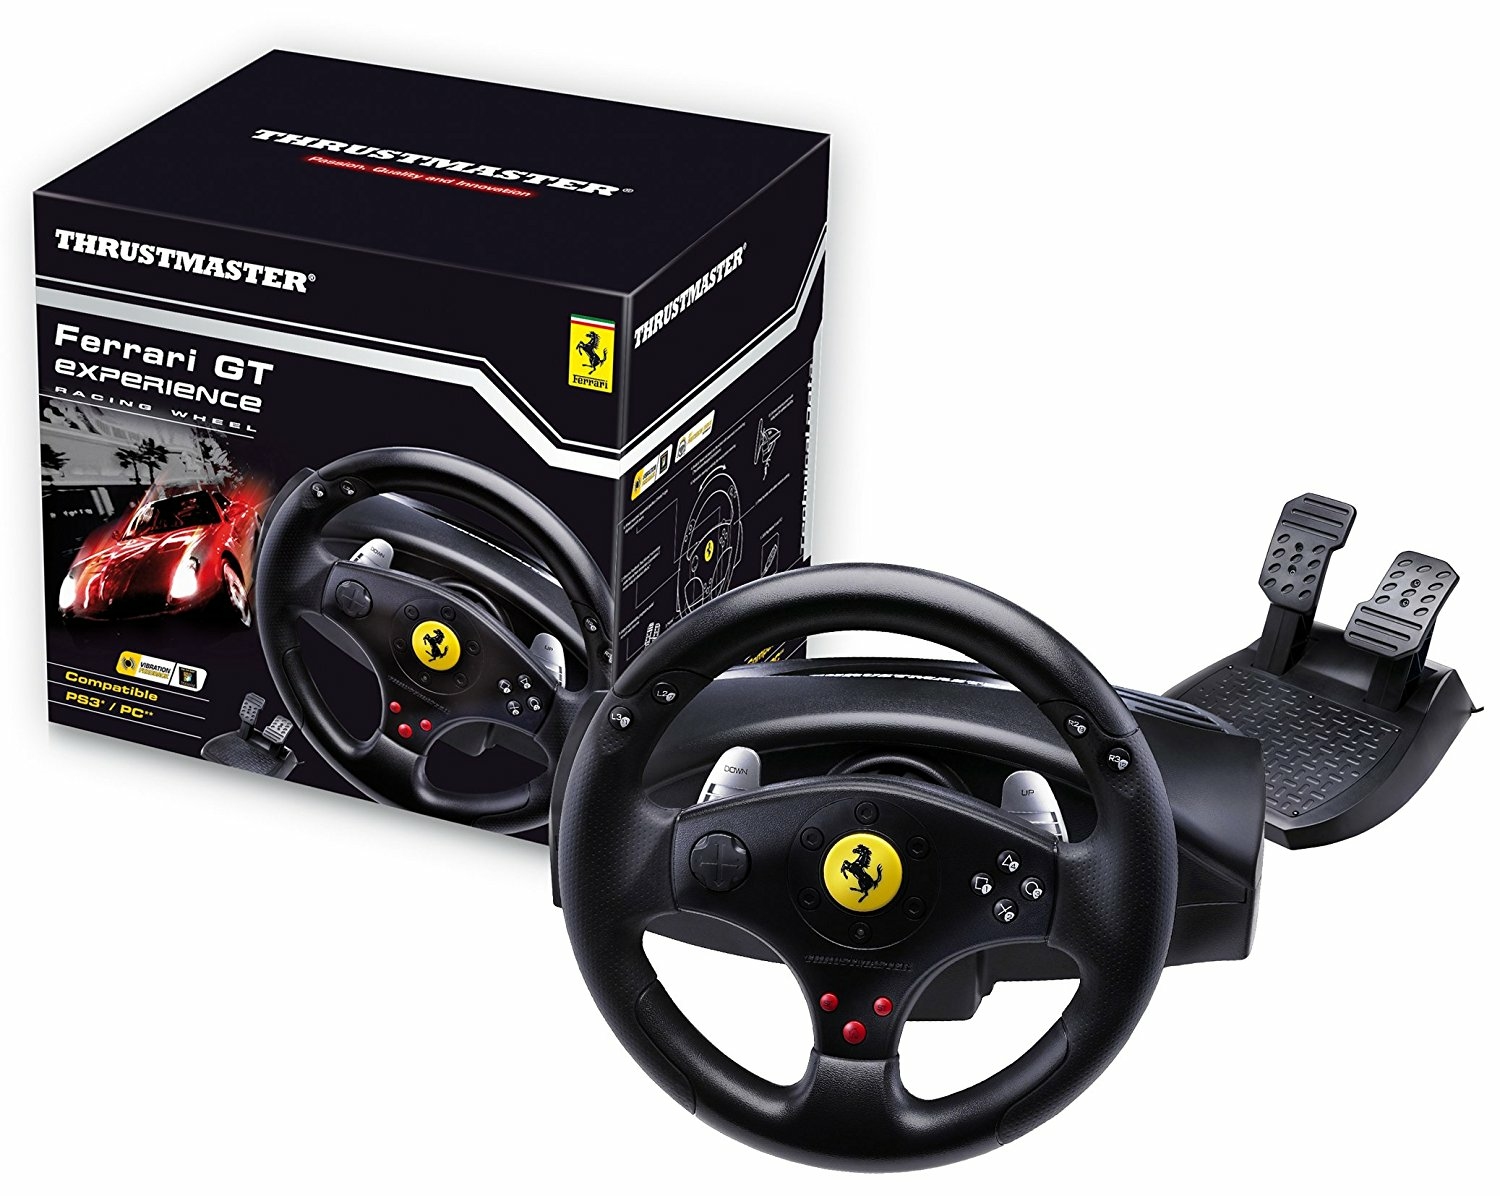 https://www.reference-gaming.com/assets/media/product/42895/ferrari-gt-experience-racing-wheel-ps3-5abb7b0f34f9a.jpg?format=product-cover-large&k=1522236174